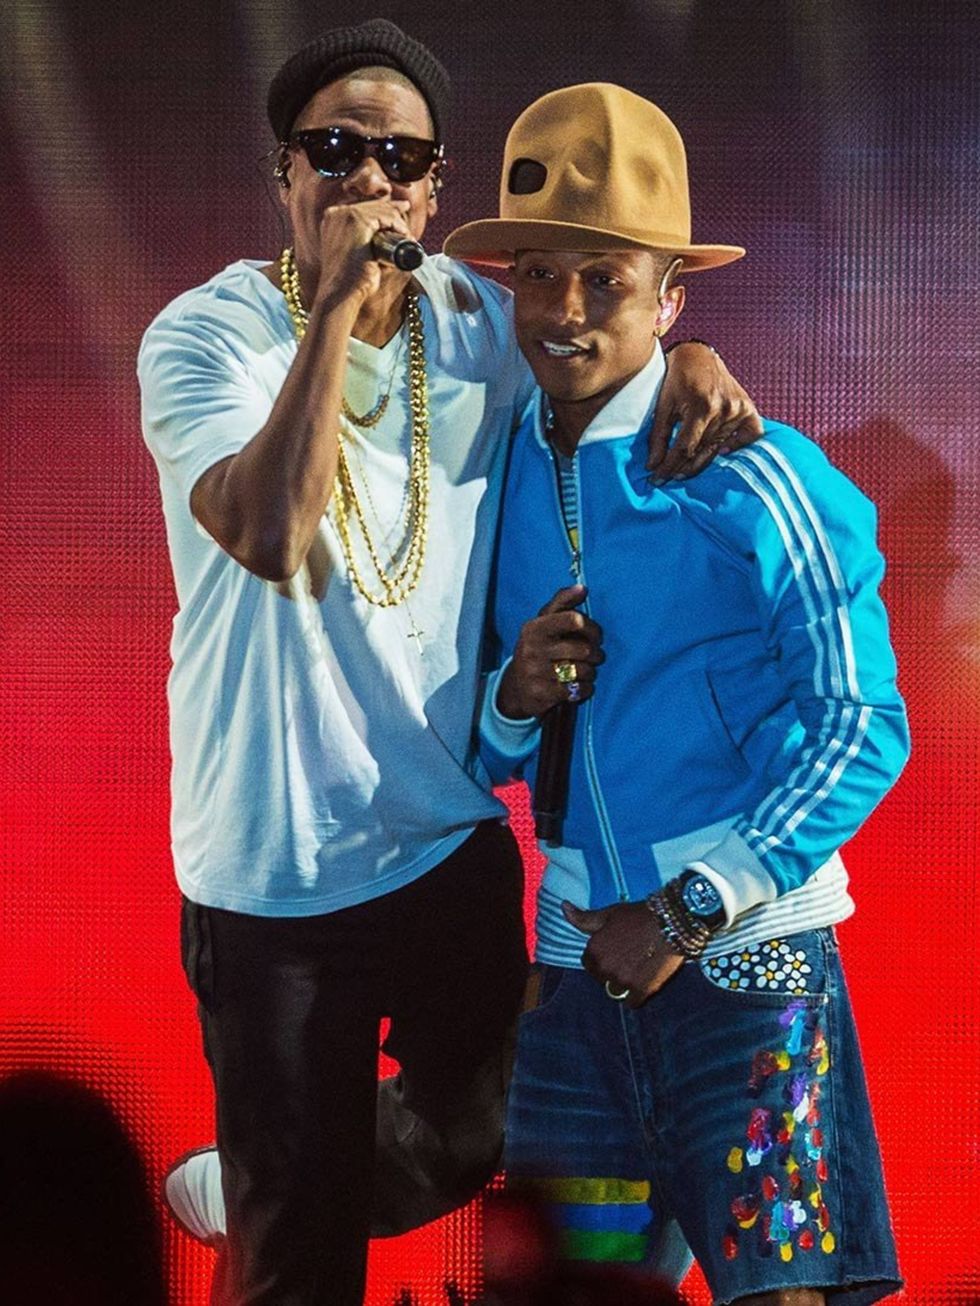 <p>Jay Z joins Pharrell Williams on stage at Coachella Festival 2014, weekend 2.</p>